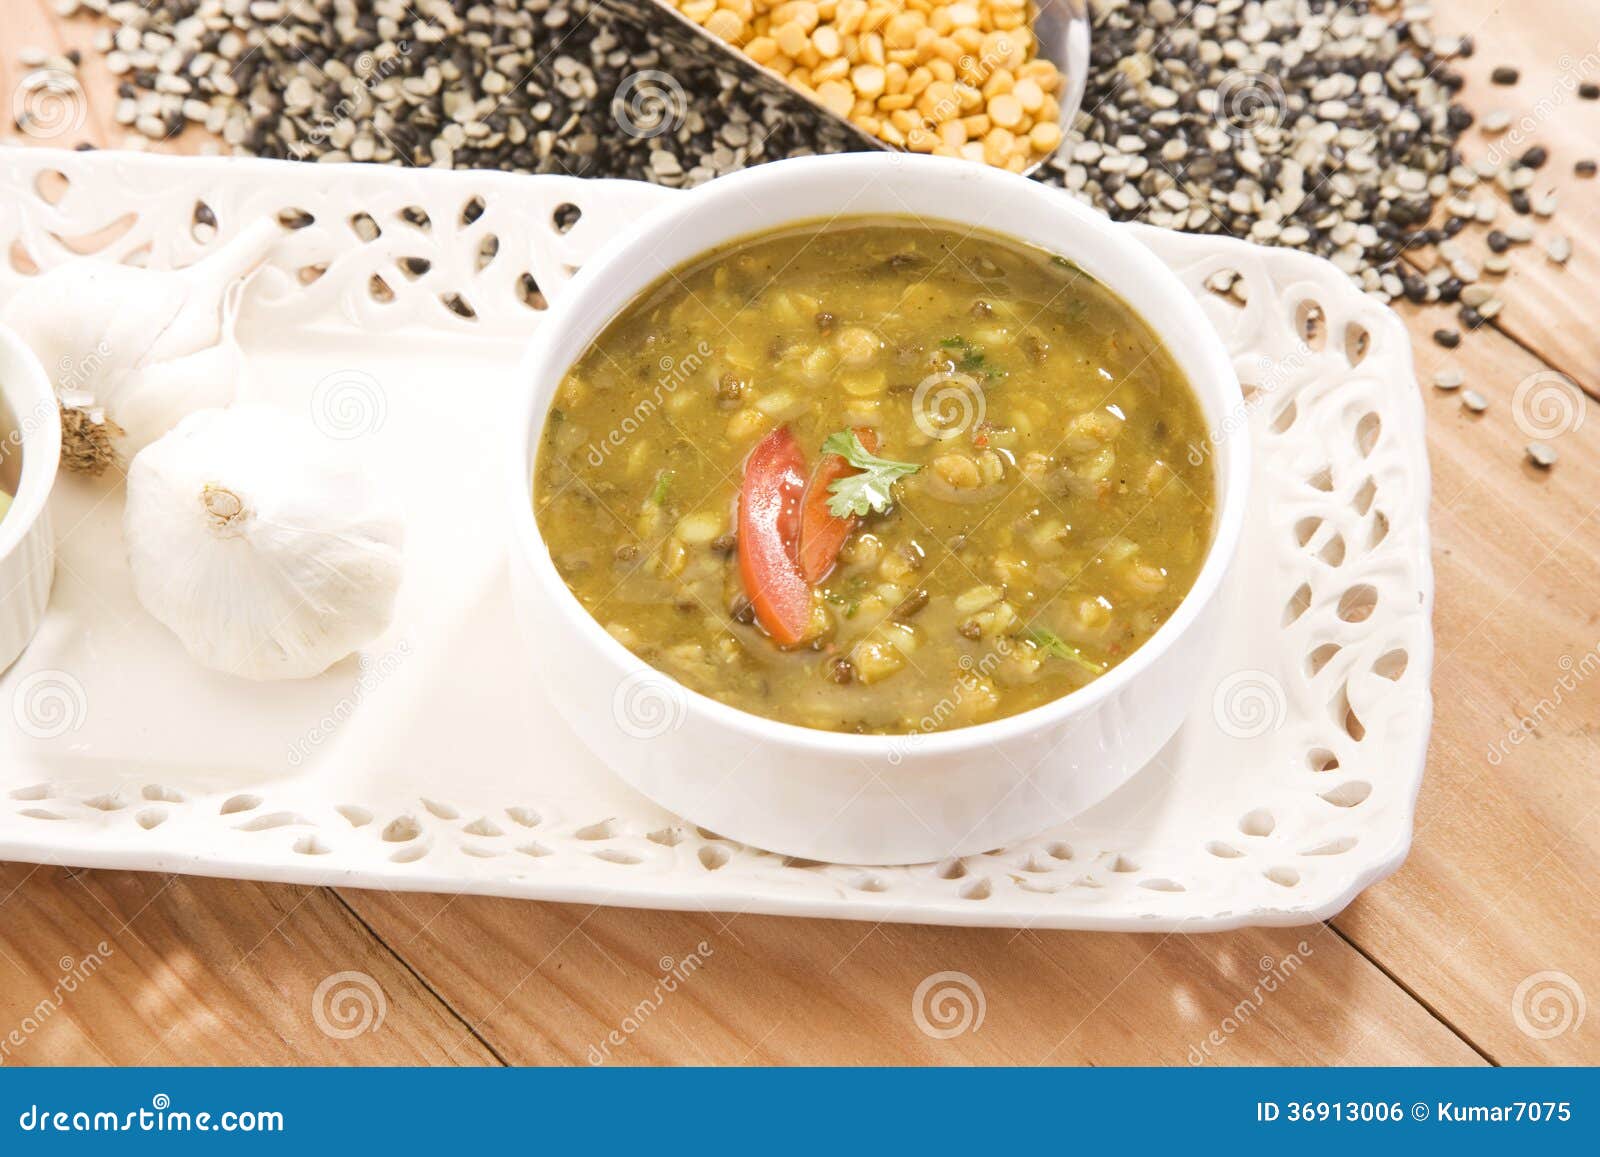 Yellow Gram & Split Black Lentils Curry Stock Photo - Image of butter ...